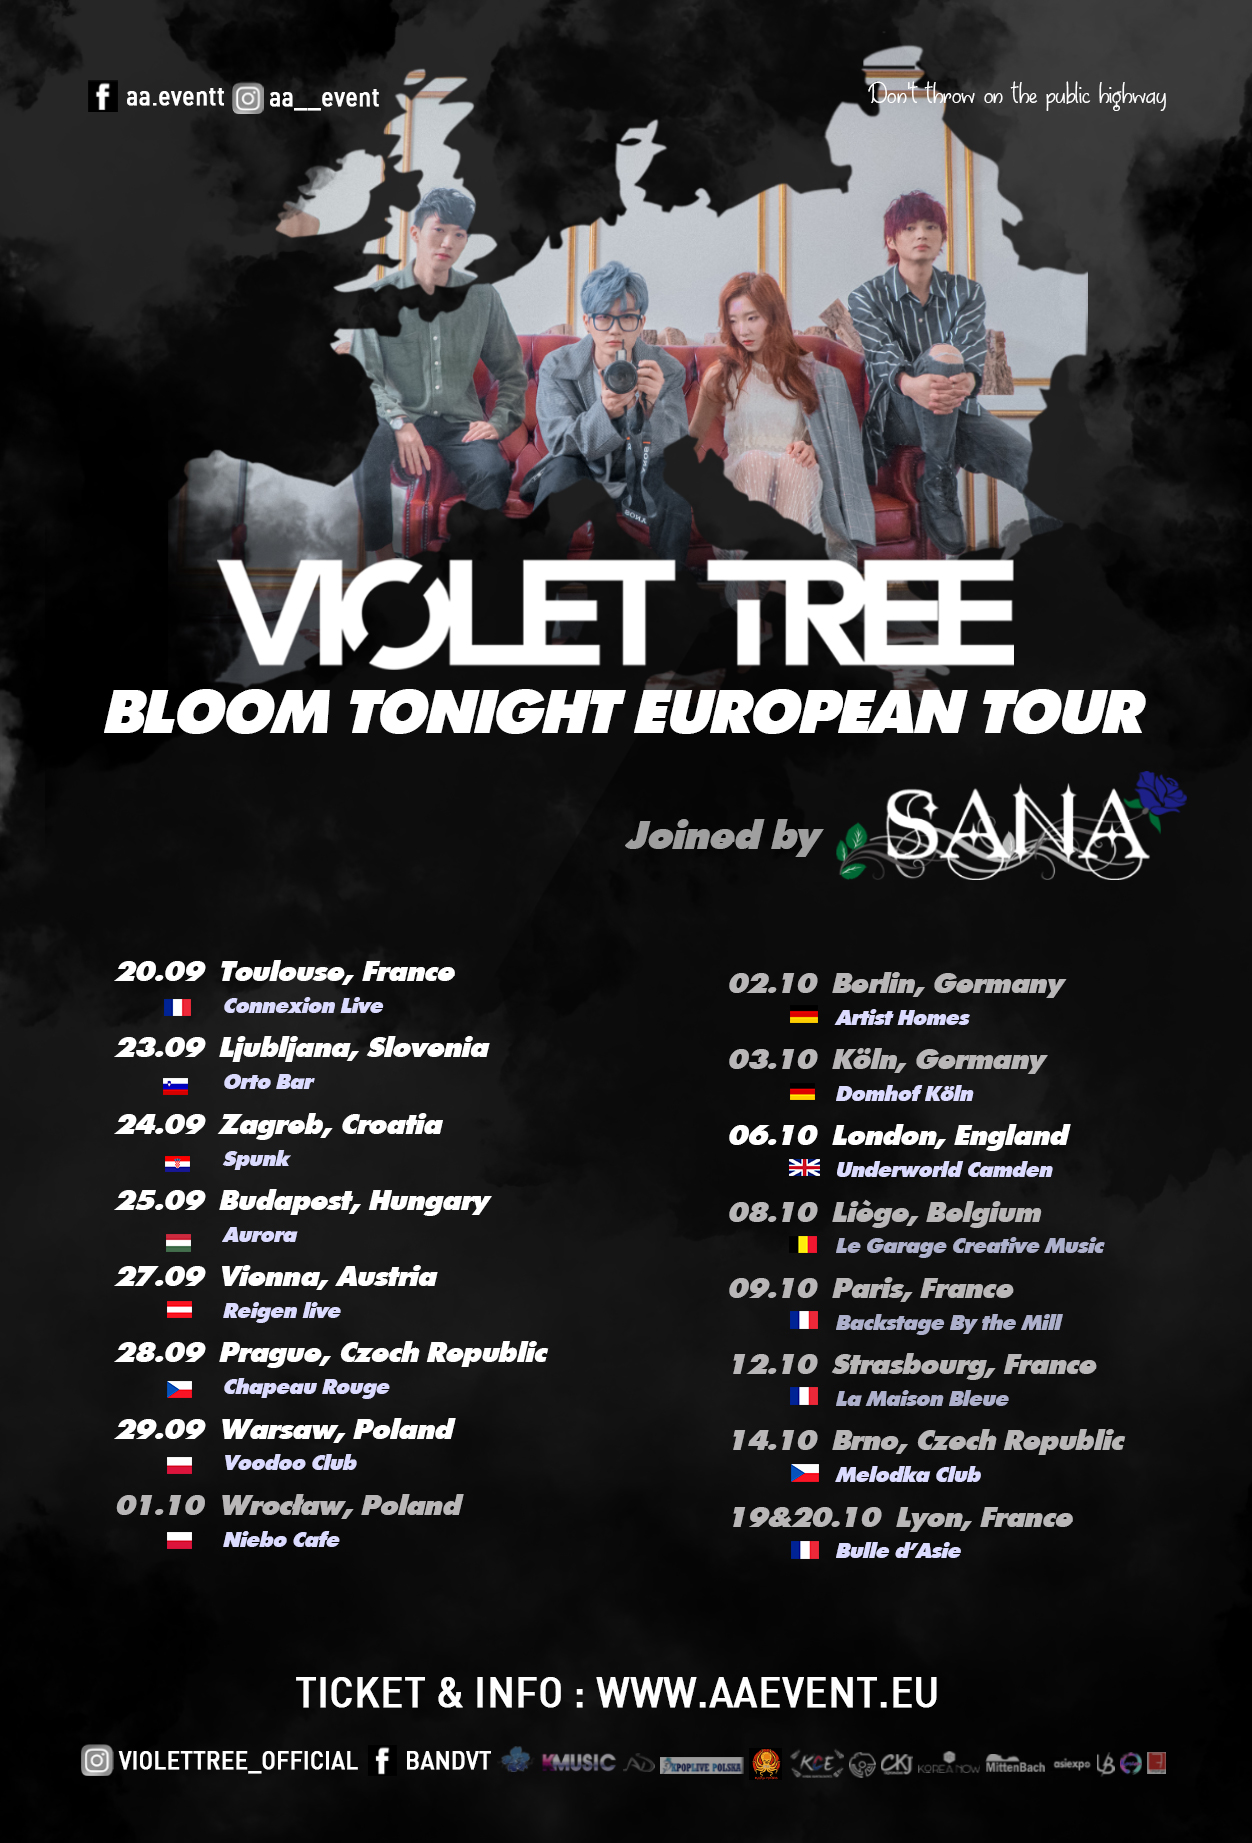 VIOLET TREE—BLOOM TONIGHT European Tour 2019 by AA Events